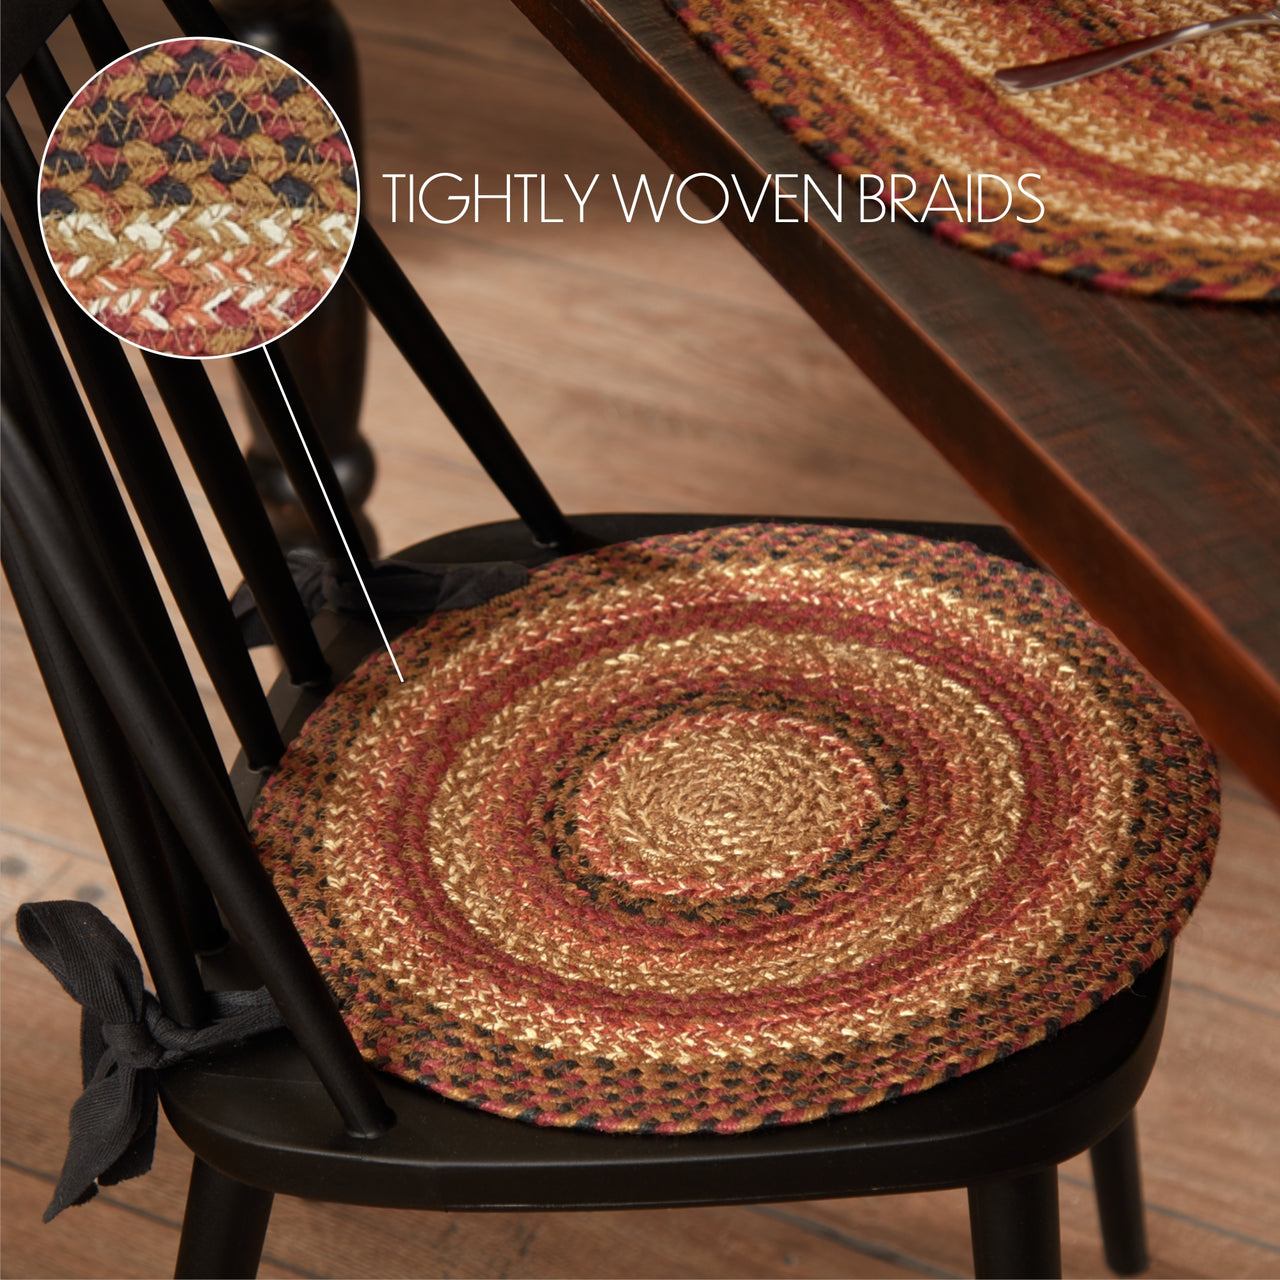 Ginger Spice Jute Braided Chair Pad VHC Brands